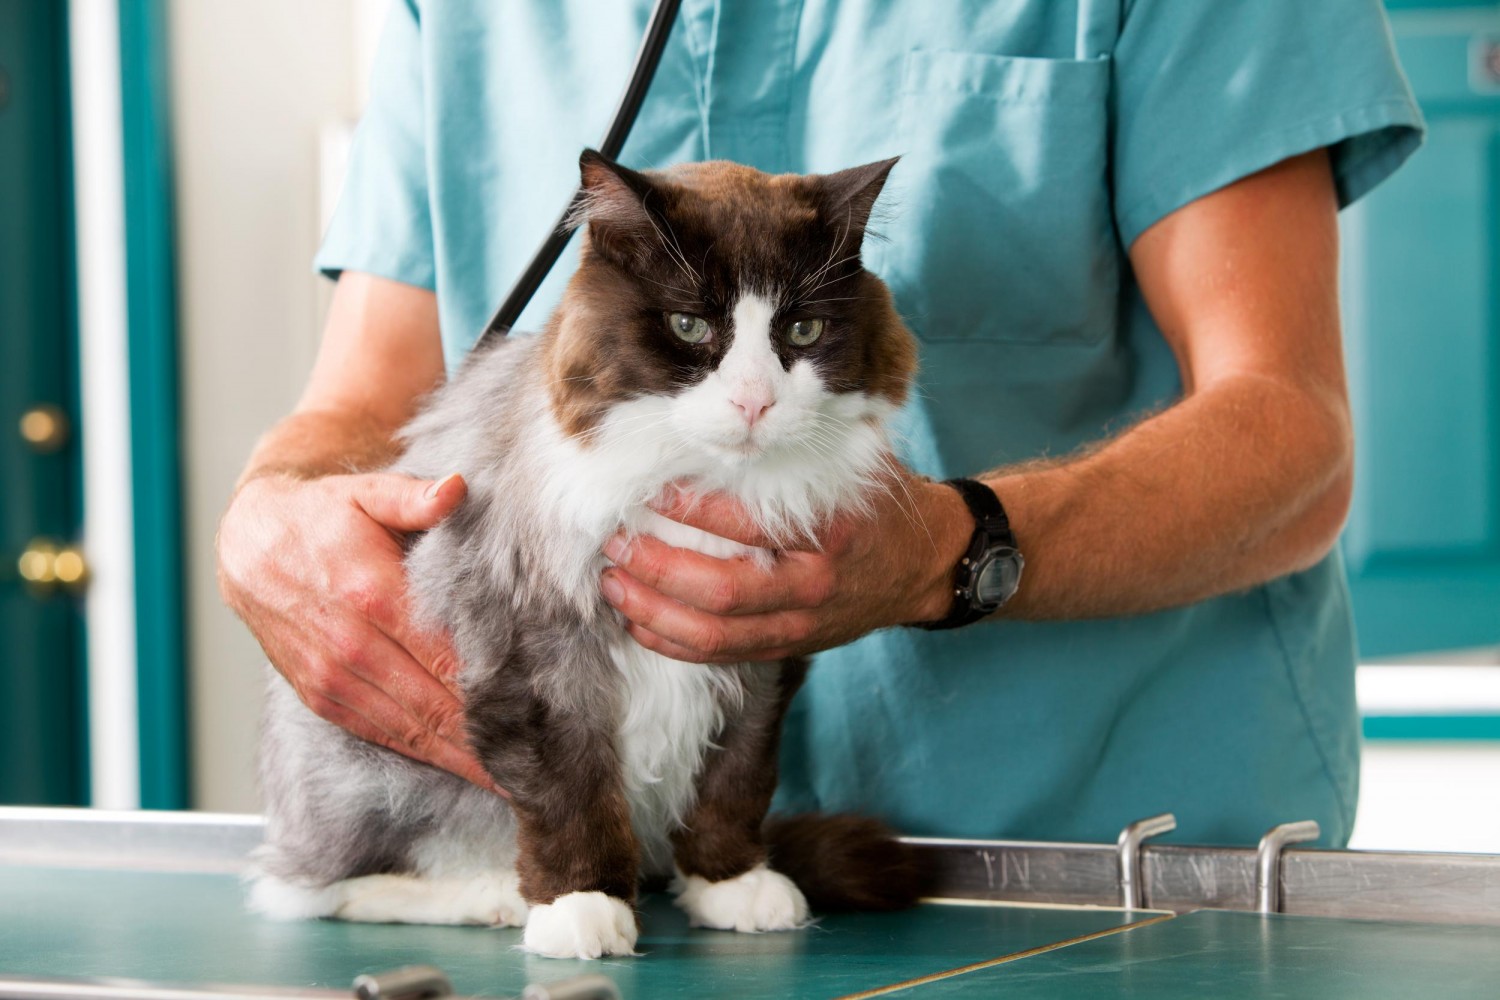 Cat being checked by Doctor